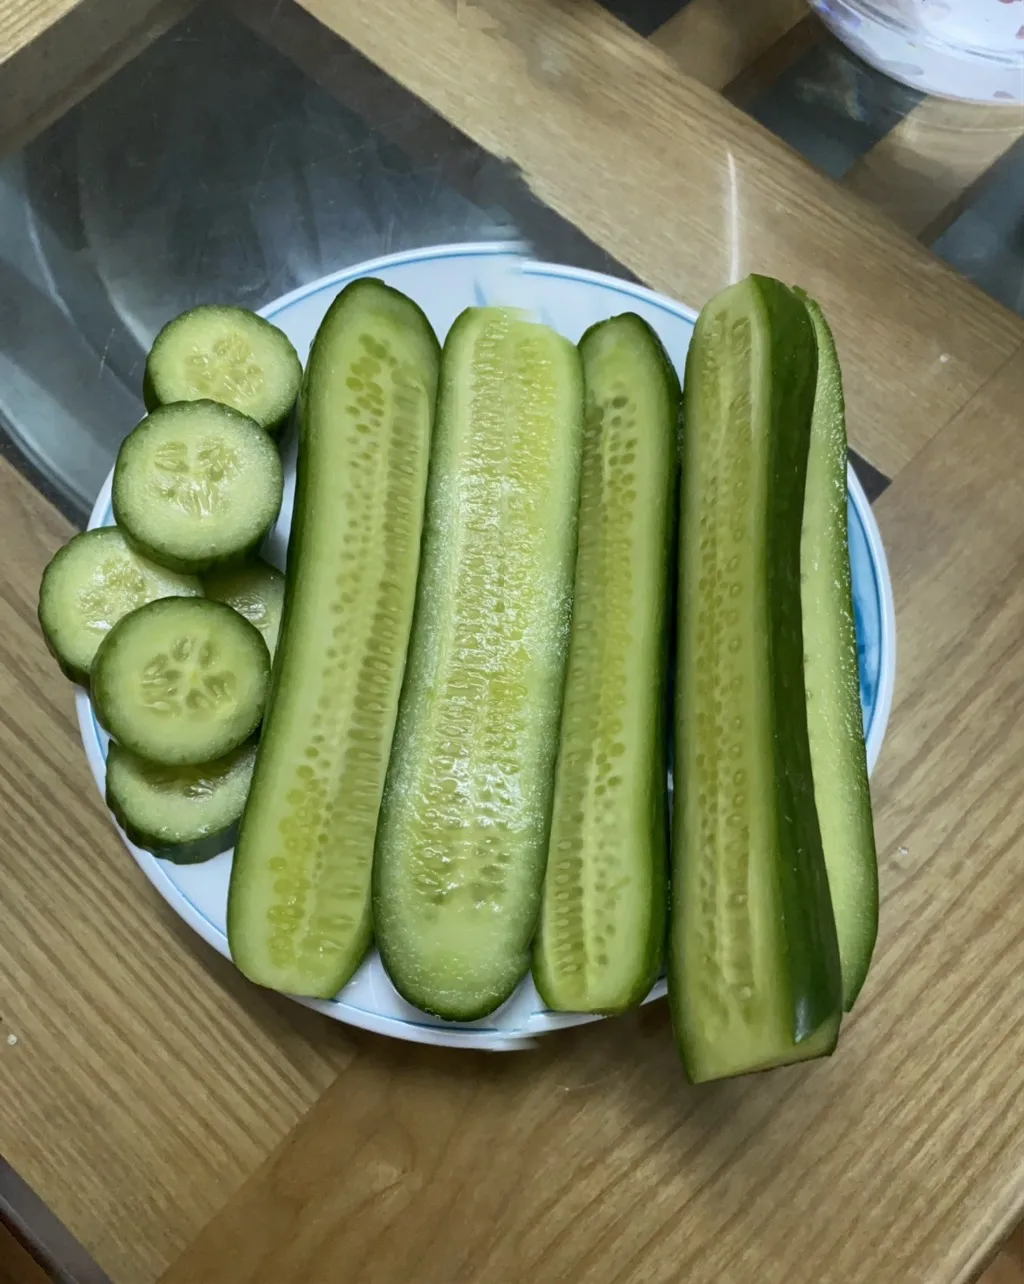 
Manufacturing Reputable and Quality Company Wholesale Fresh And Juicy Young Cucumber Products In Bulk Buy Now For Sale 